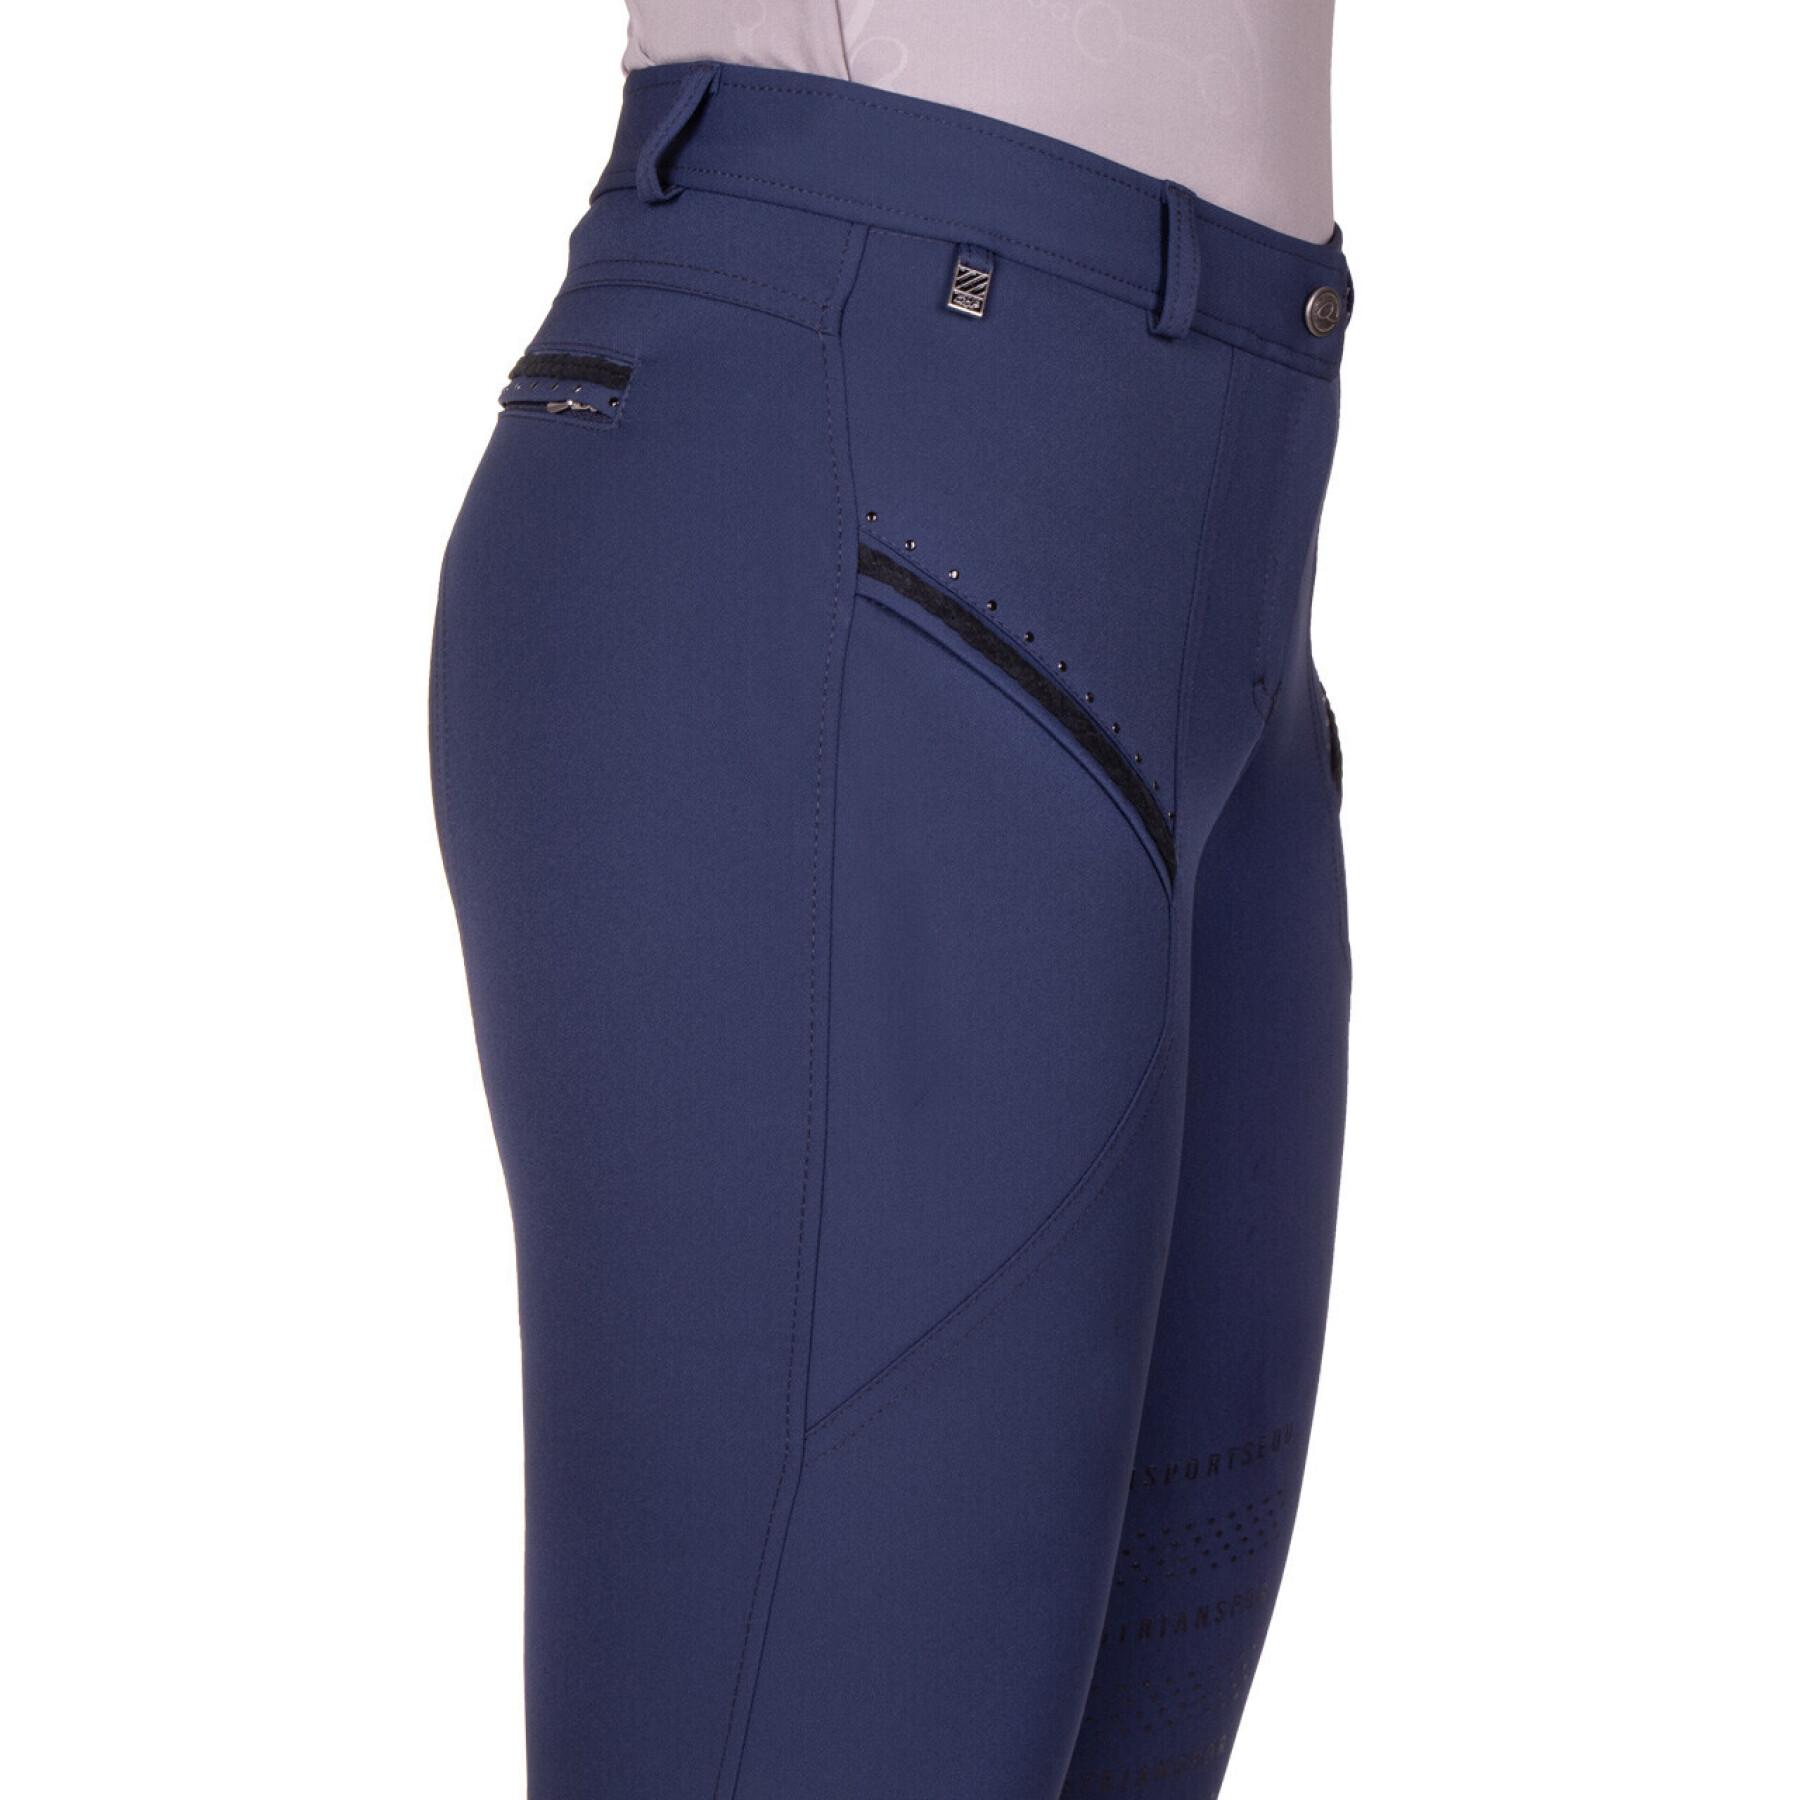 Riding pants with grip for women QHP Jace